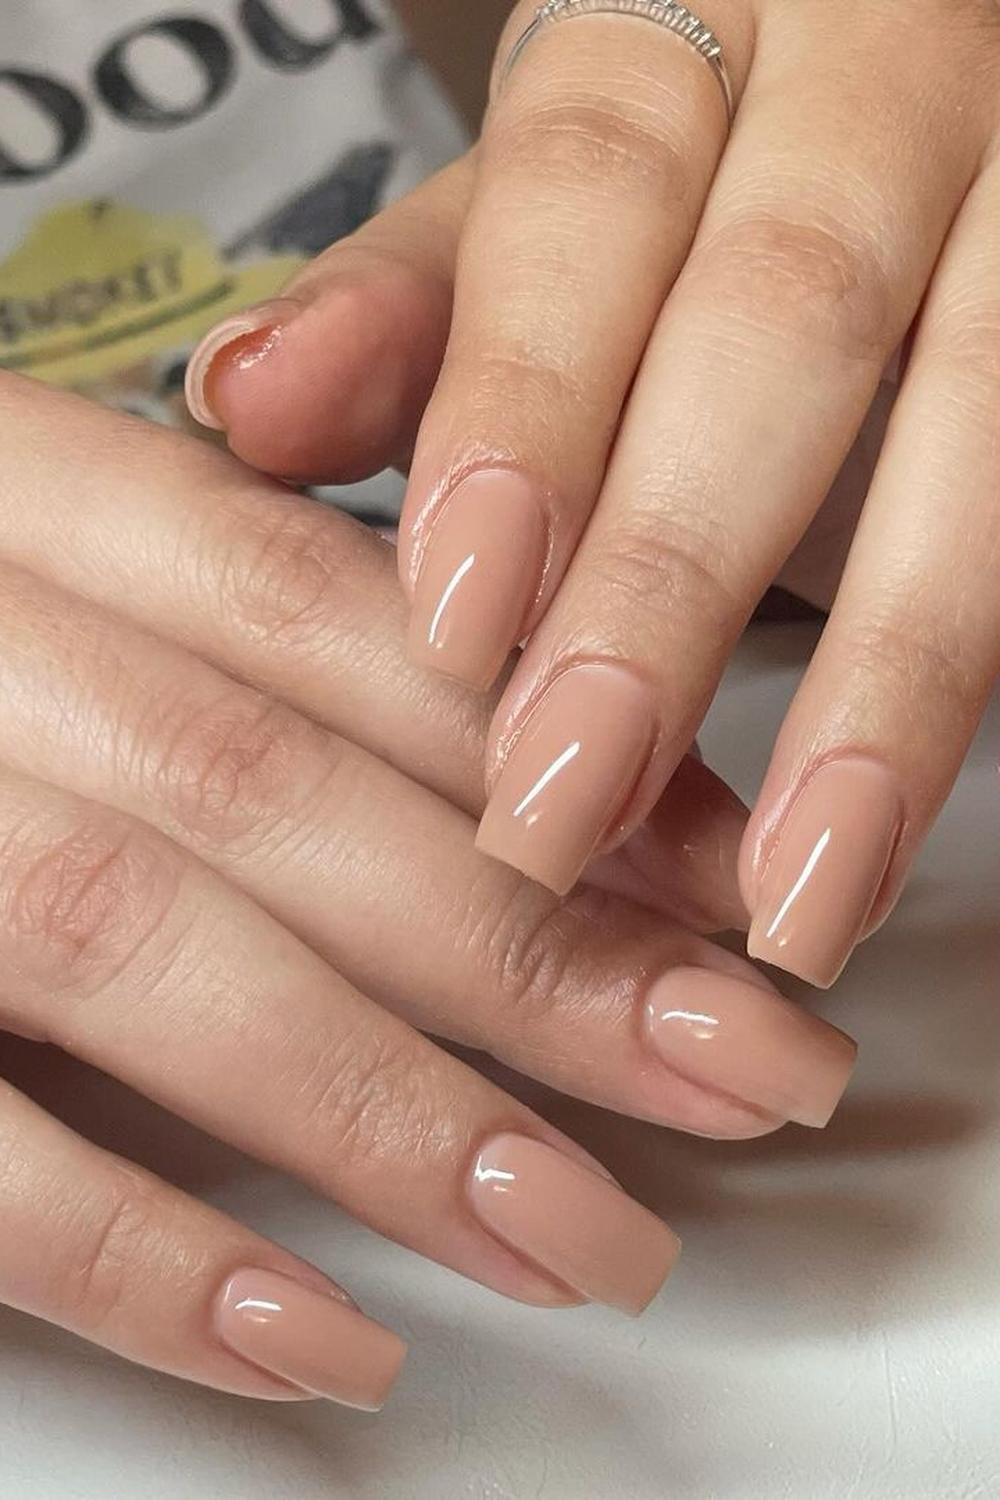 1 - Picture of Nude Nails